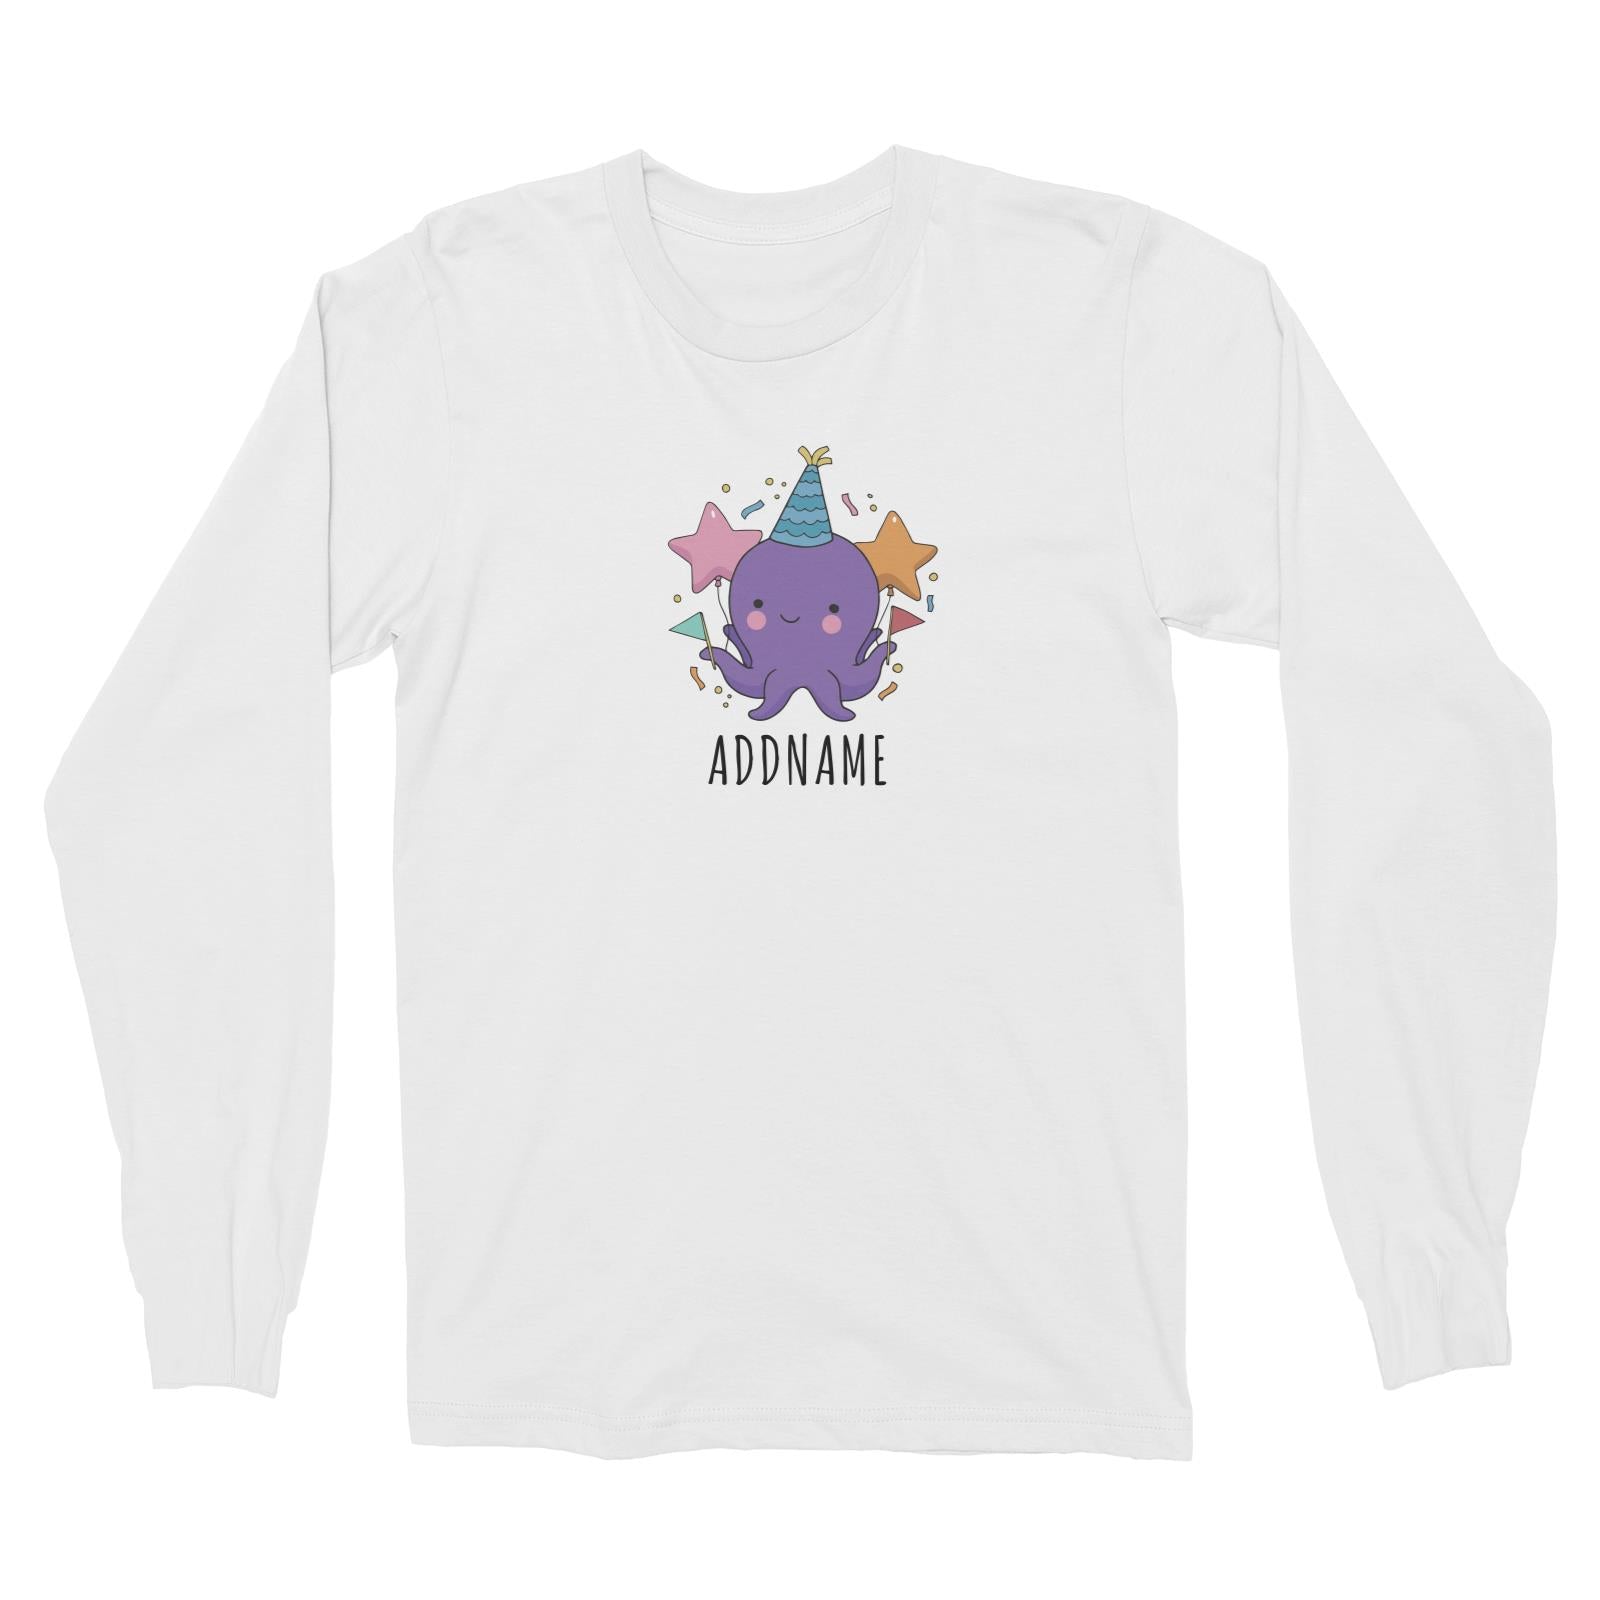 Birthday Sketch Animals Octopus with Flags Addname Long Sleeve Unisex T-Shirt